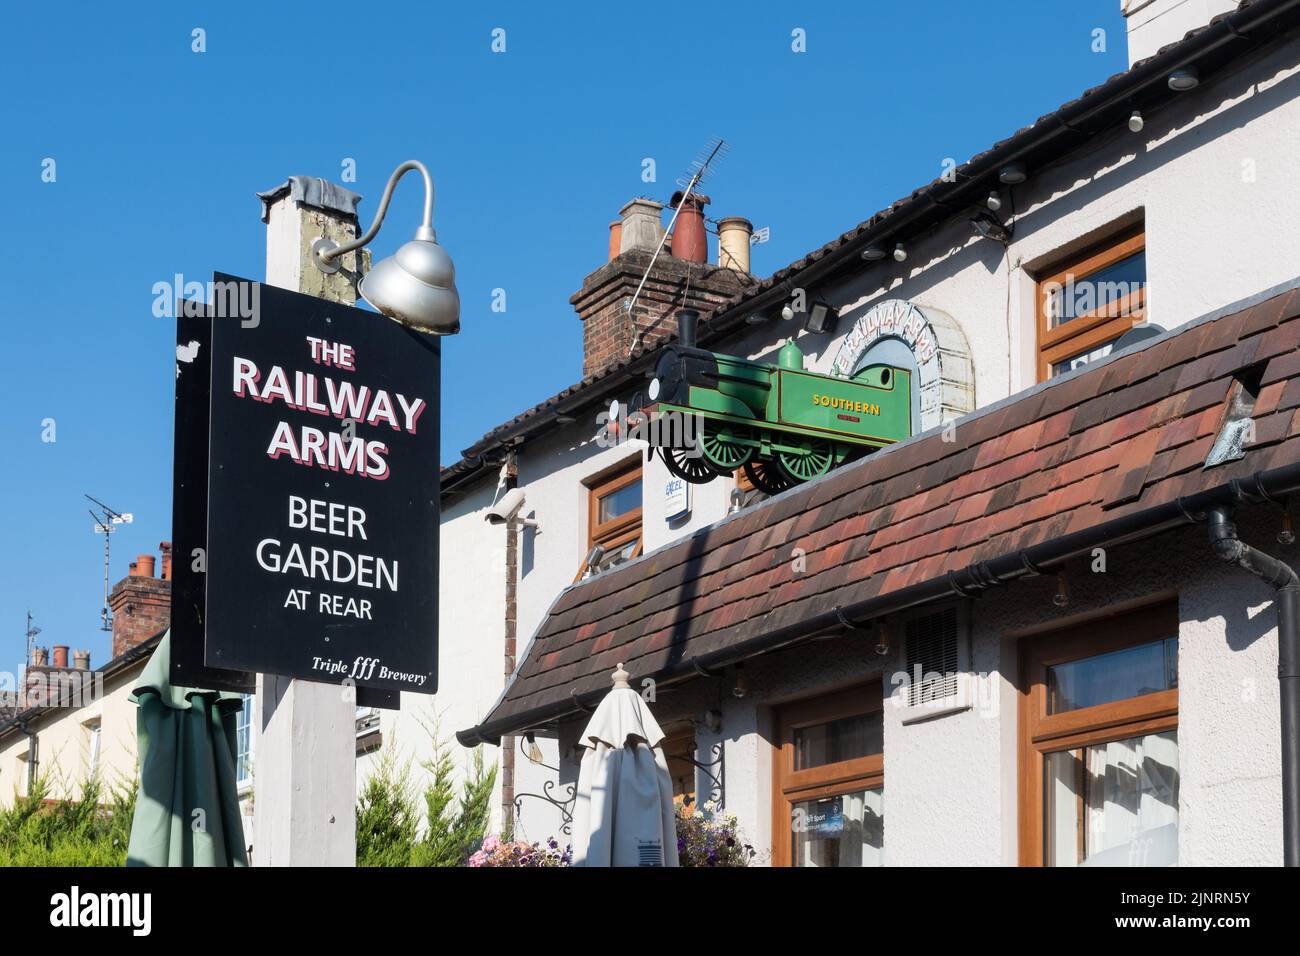 The Railway Arms pub with a model train on the wall, Alton, Hampshire, England, UK Stock Photo